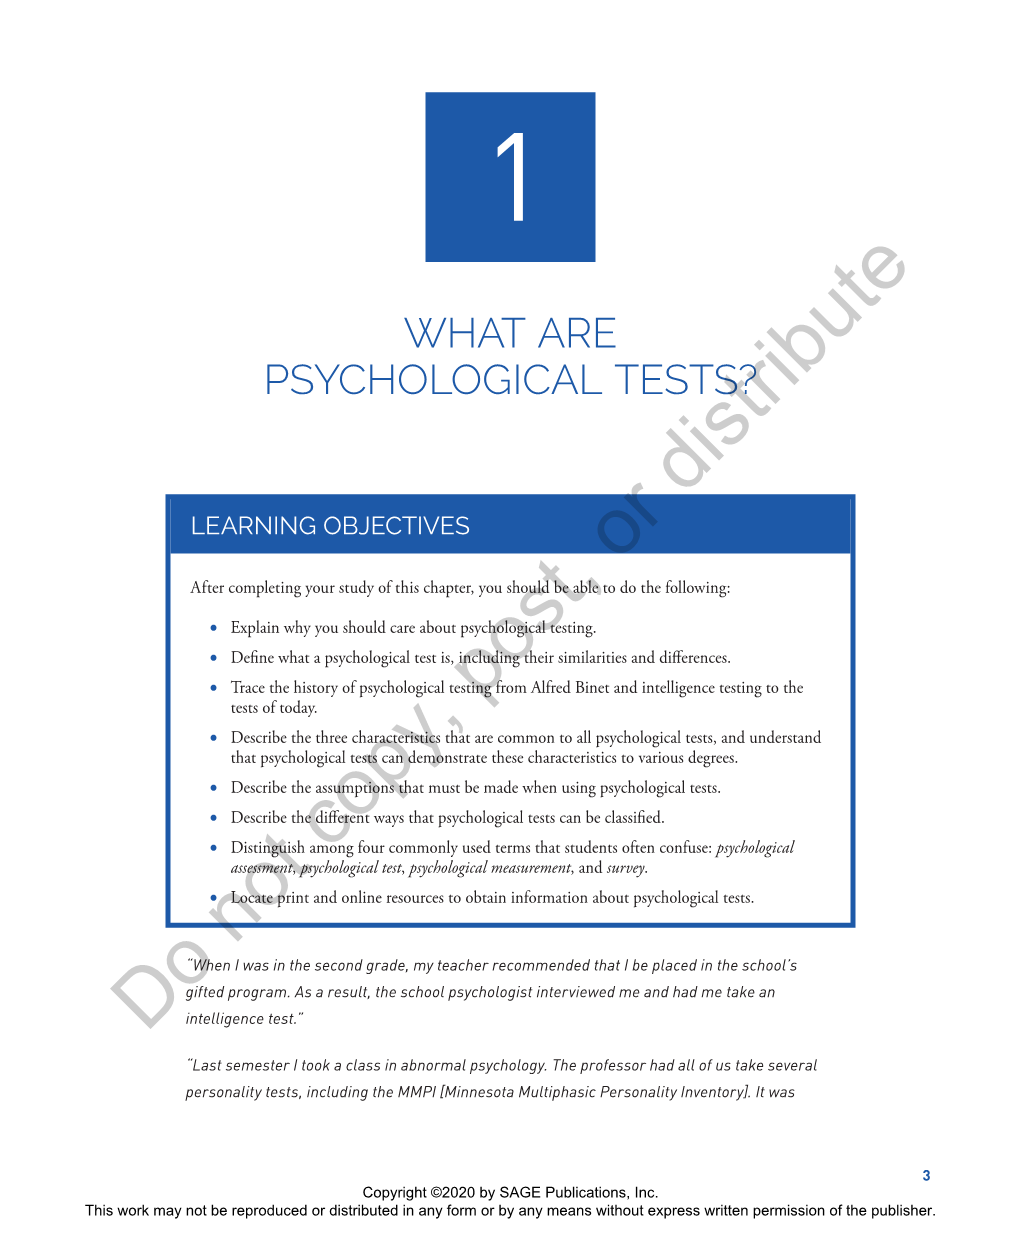 WHAT ARE PSYCHOLOGICAL TESTS? Distribute LEARNING OBJECTIVES Or After Completing Your Study of This Chapter, You Should Be Able to Do the Following